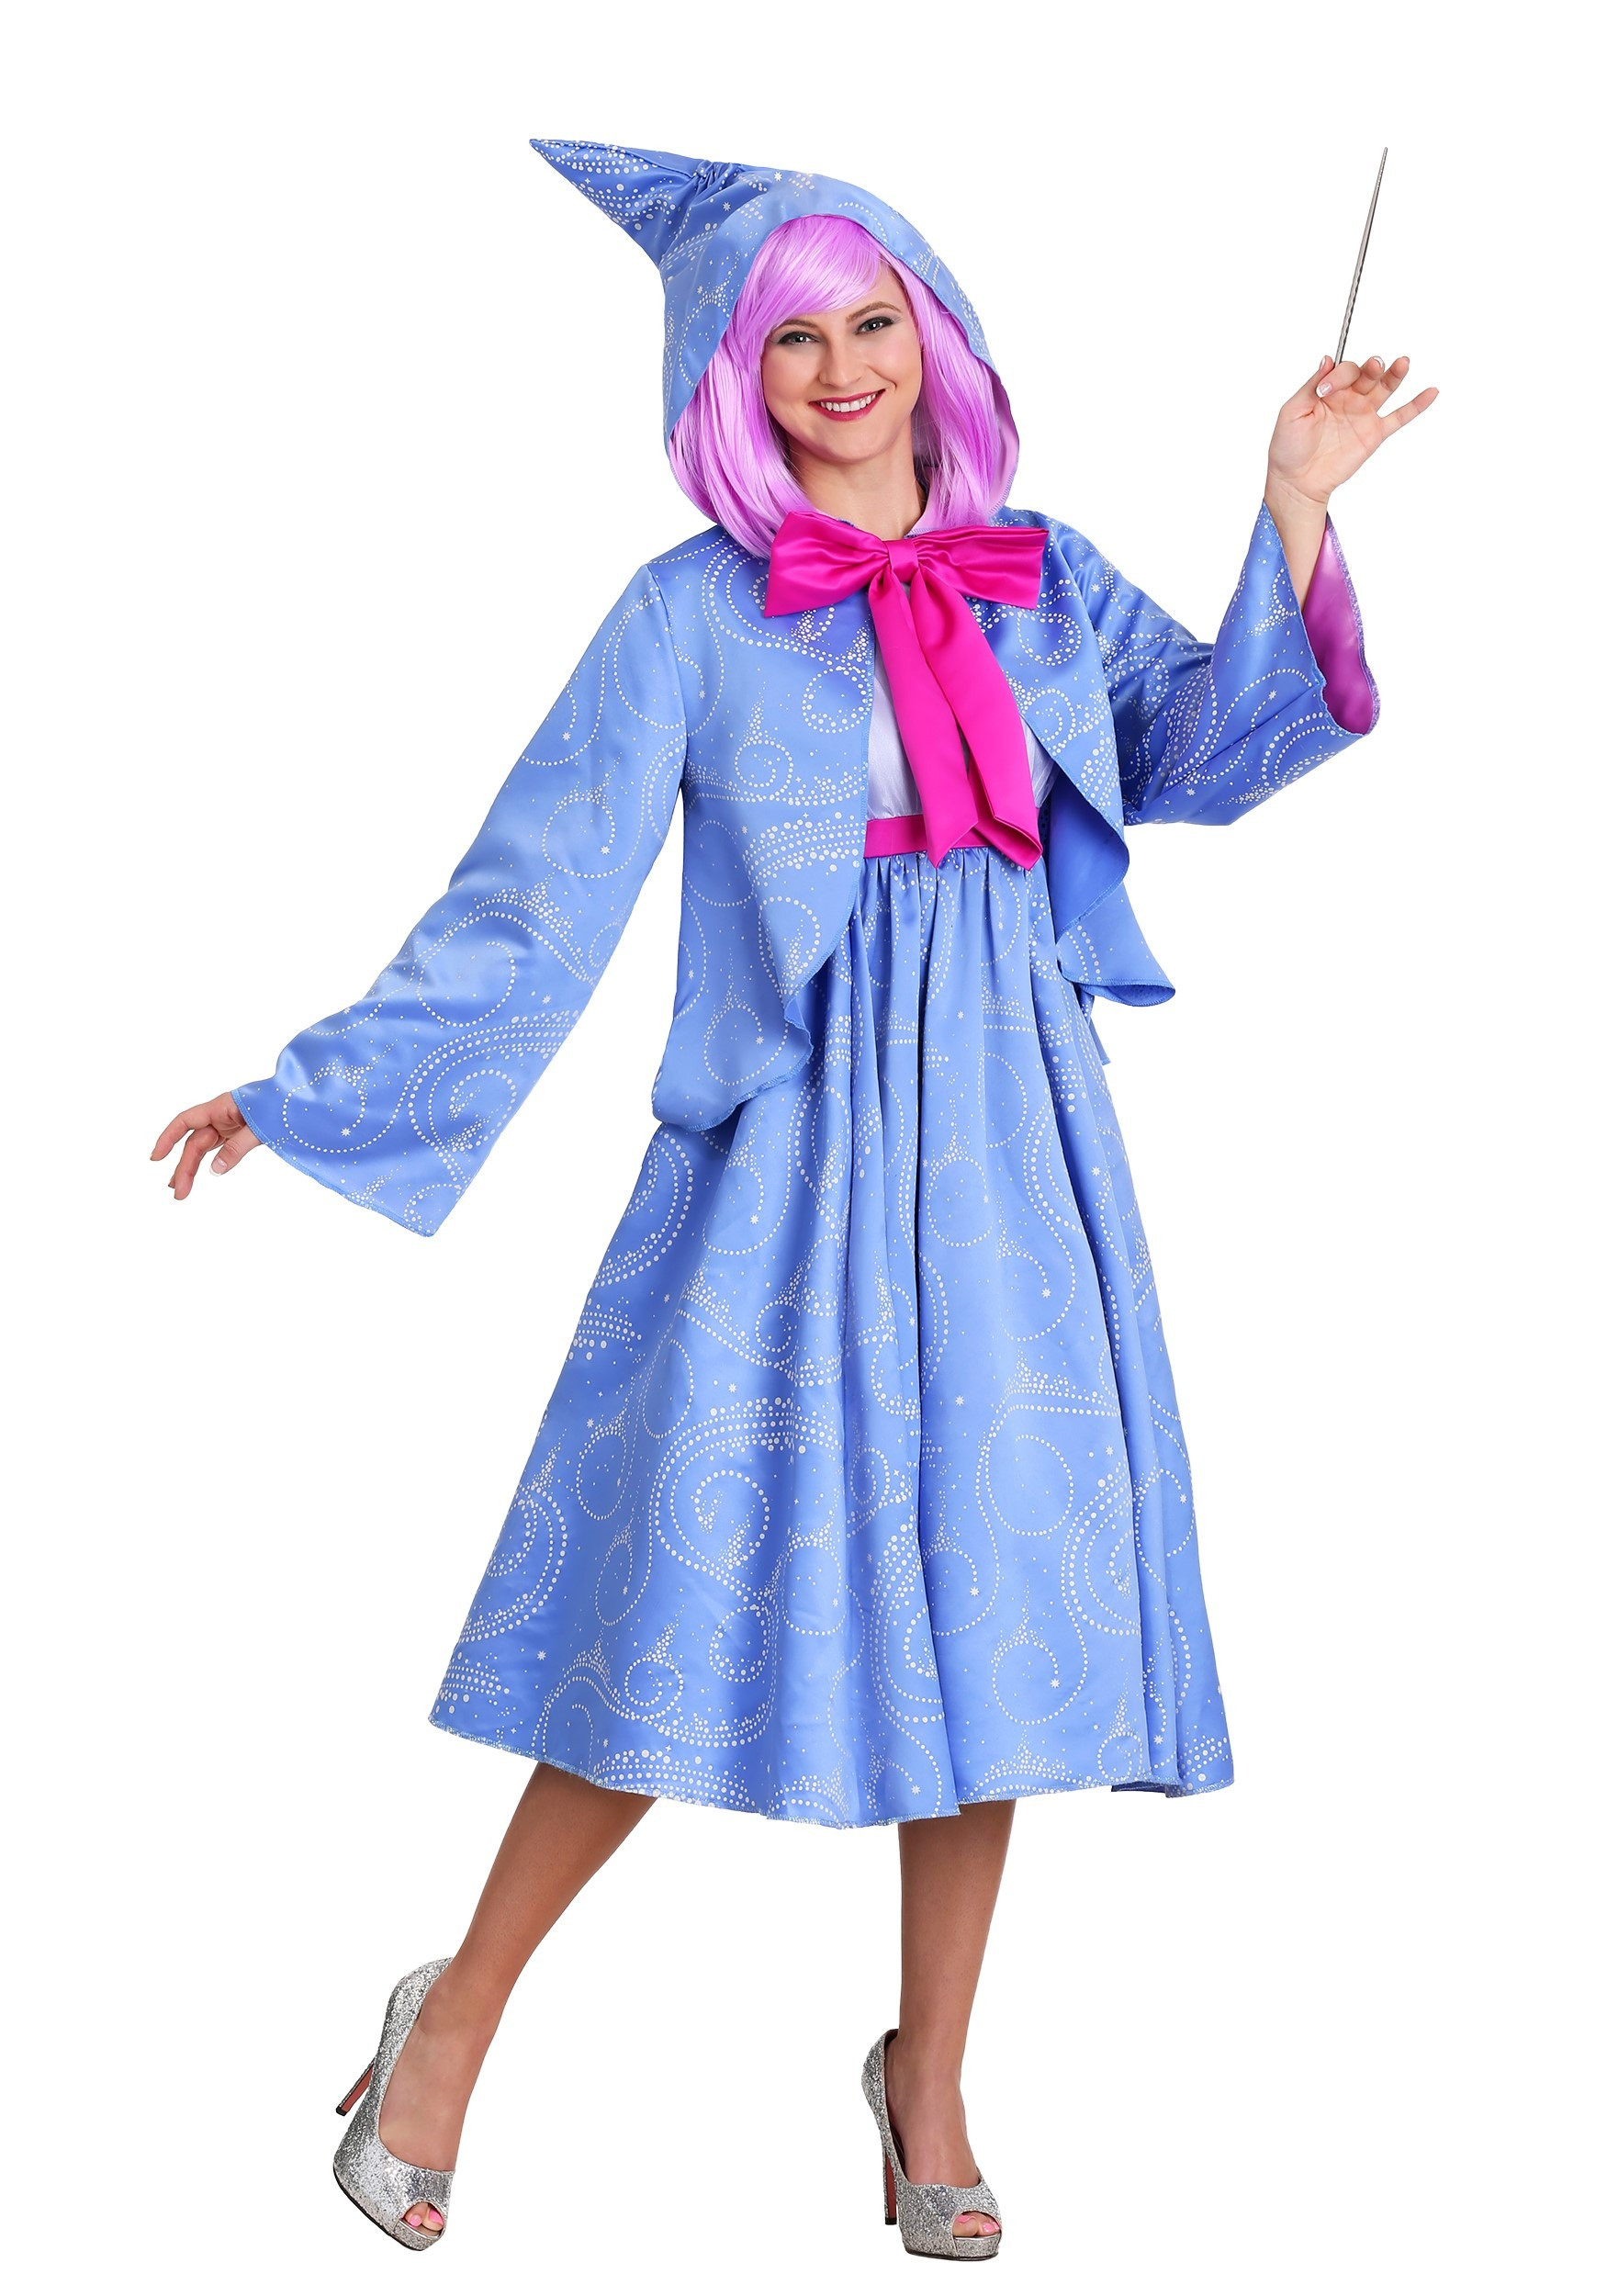 Fairy Godmother Costume DIY
 Fairy Godmother Costume for Women